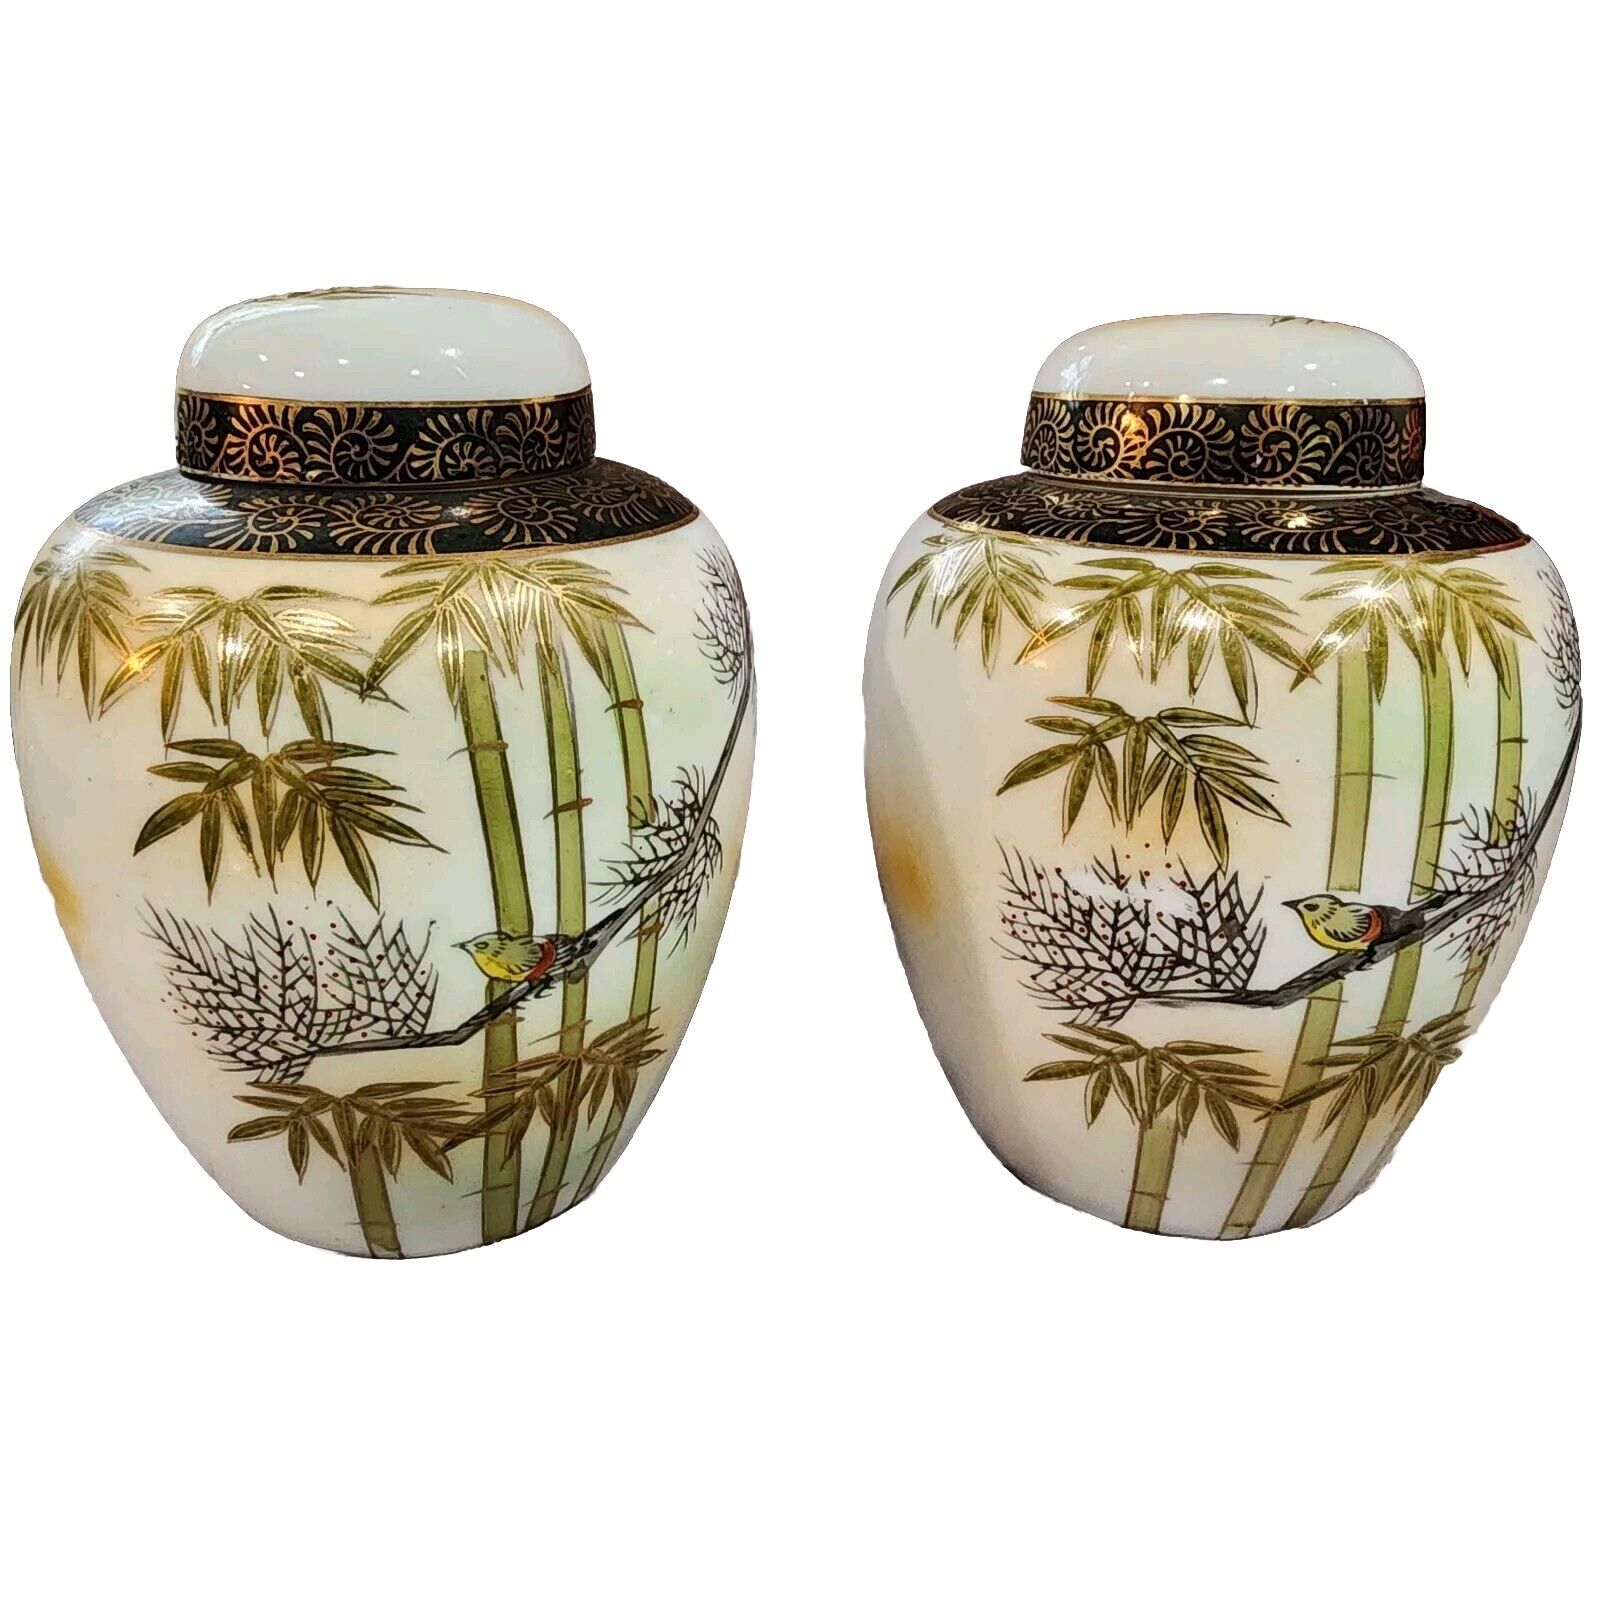 Matched Pair   Japanese ginger jars